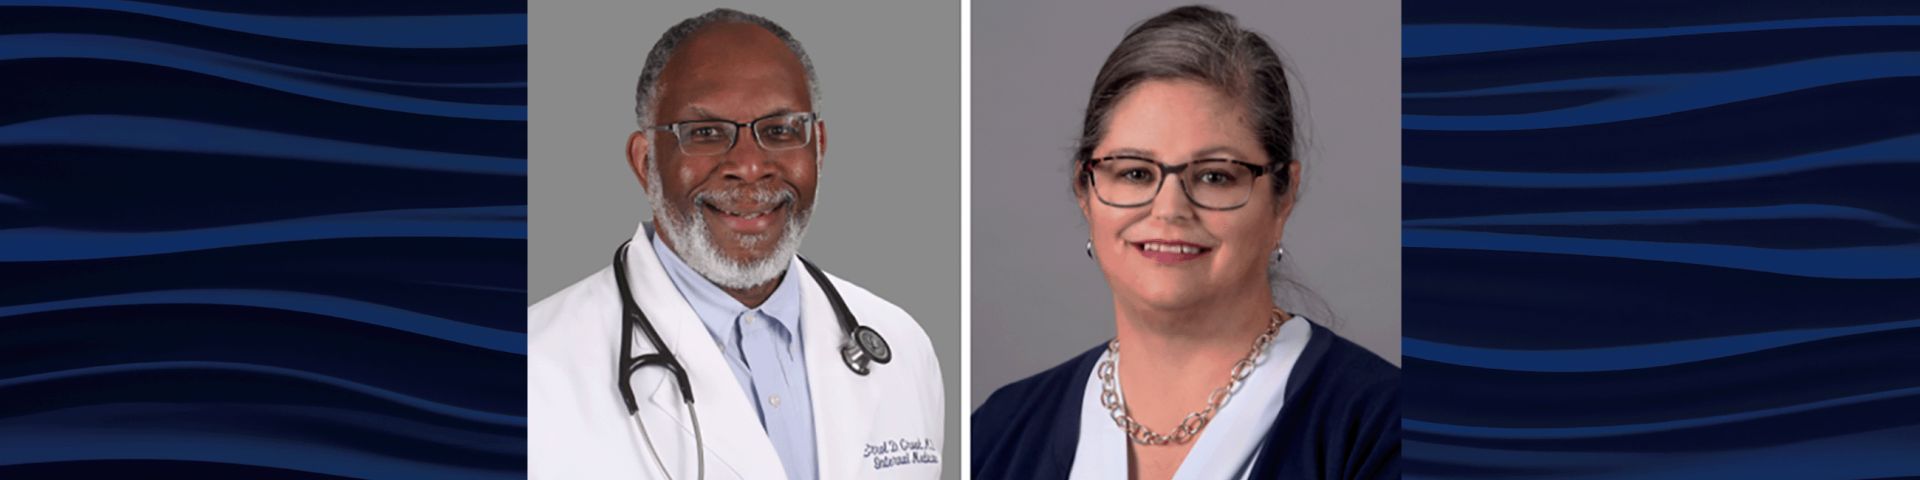 Leadership changes announced for Department of Internal Medicine